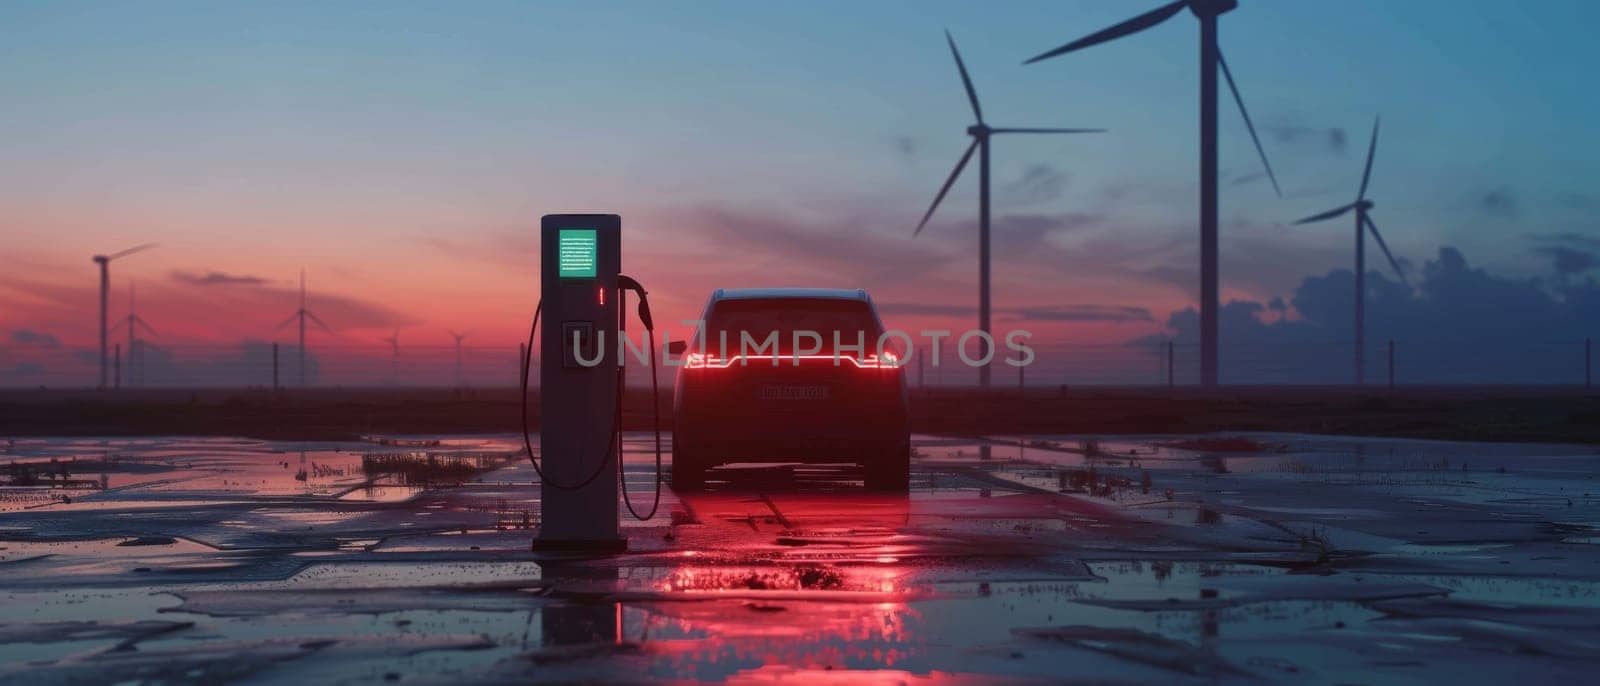 A solitary electric vehicle charges at a sleek station, highlighted by the ambient glow of a vibrant sunset with distant wind turbines silhouetted against the colorful sky. by sfinks